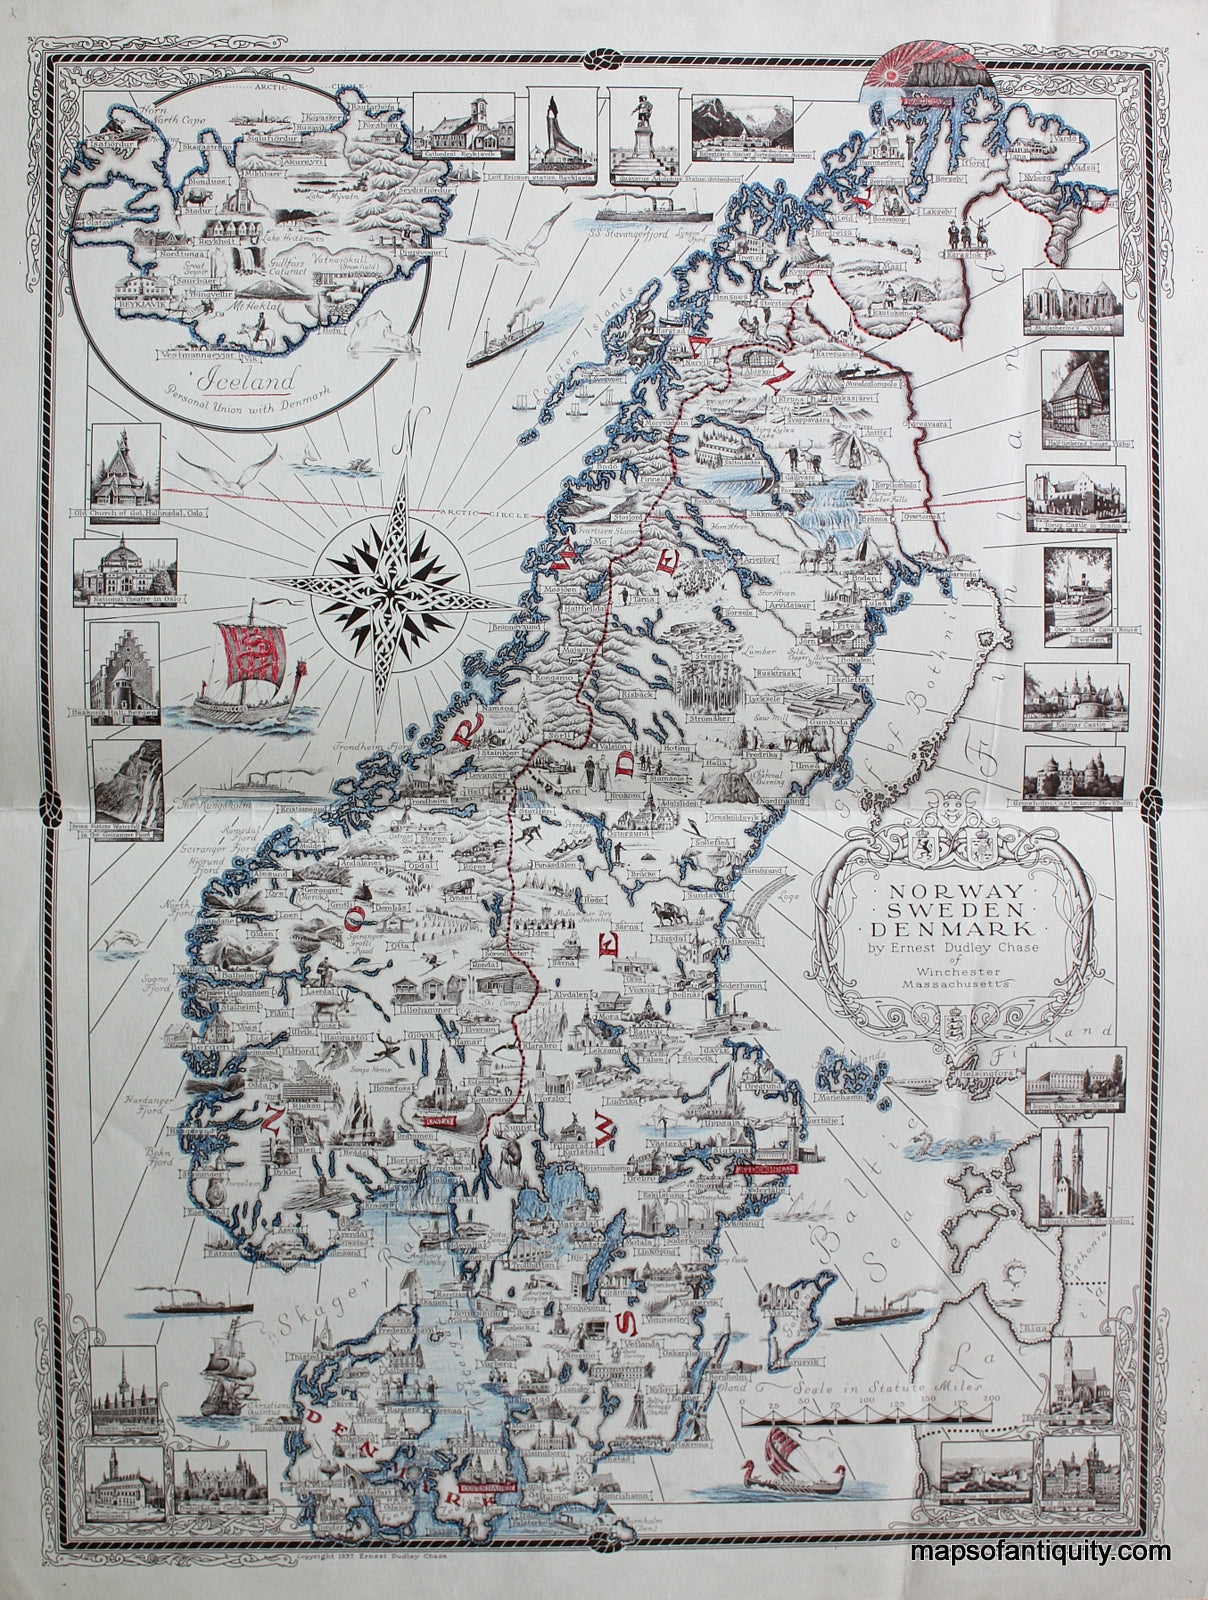 Antique-Pictorial-Map-Norway-Sweden-Denmark-by-Ernest-Dudley-Chase-(with-inset-of-Iceland)**********-Europe-Scandinavia-1937-Ernest-Dudley-Chase-Maps-Of-Antiquity